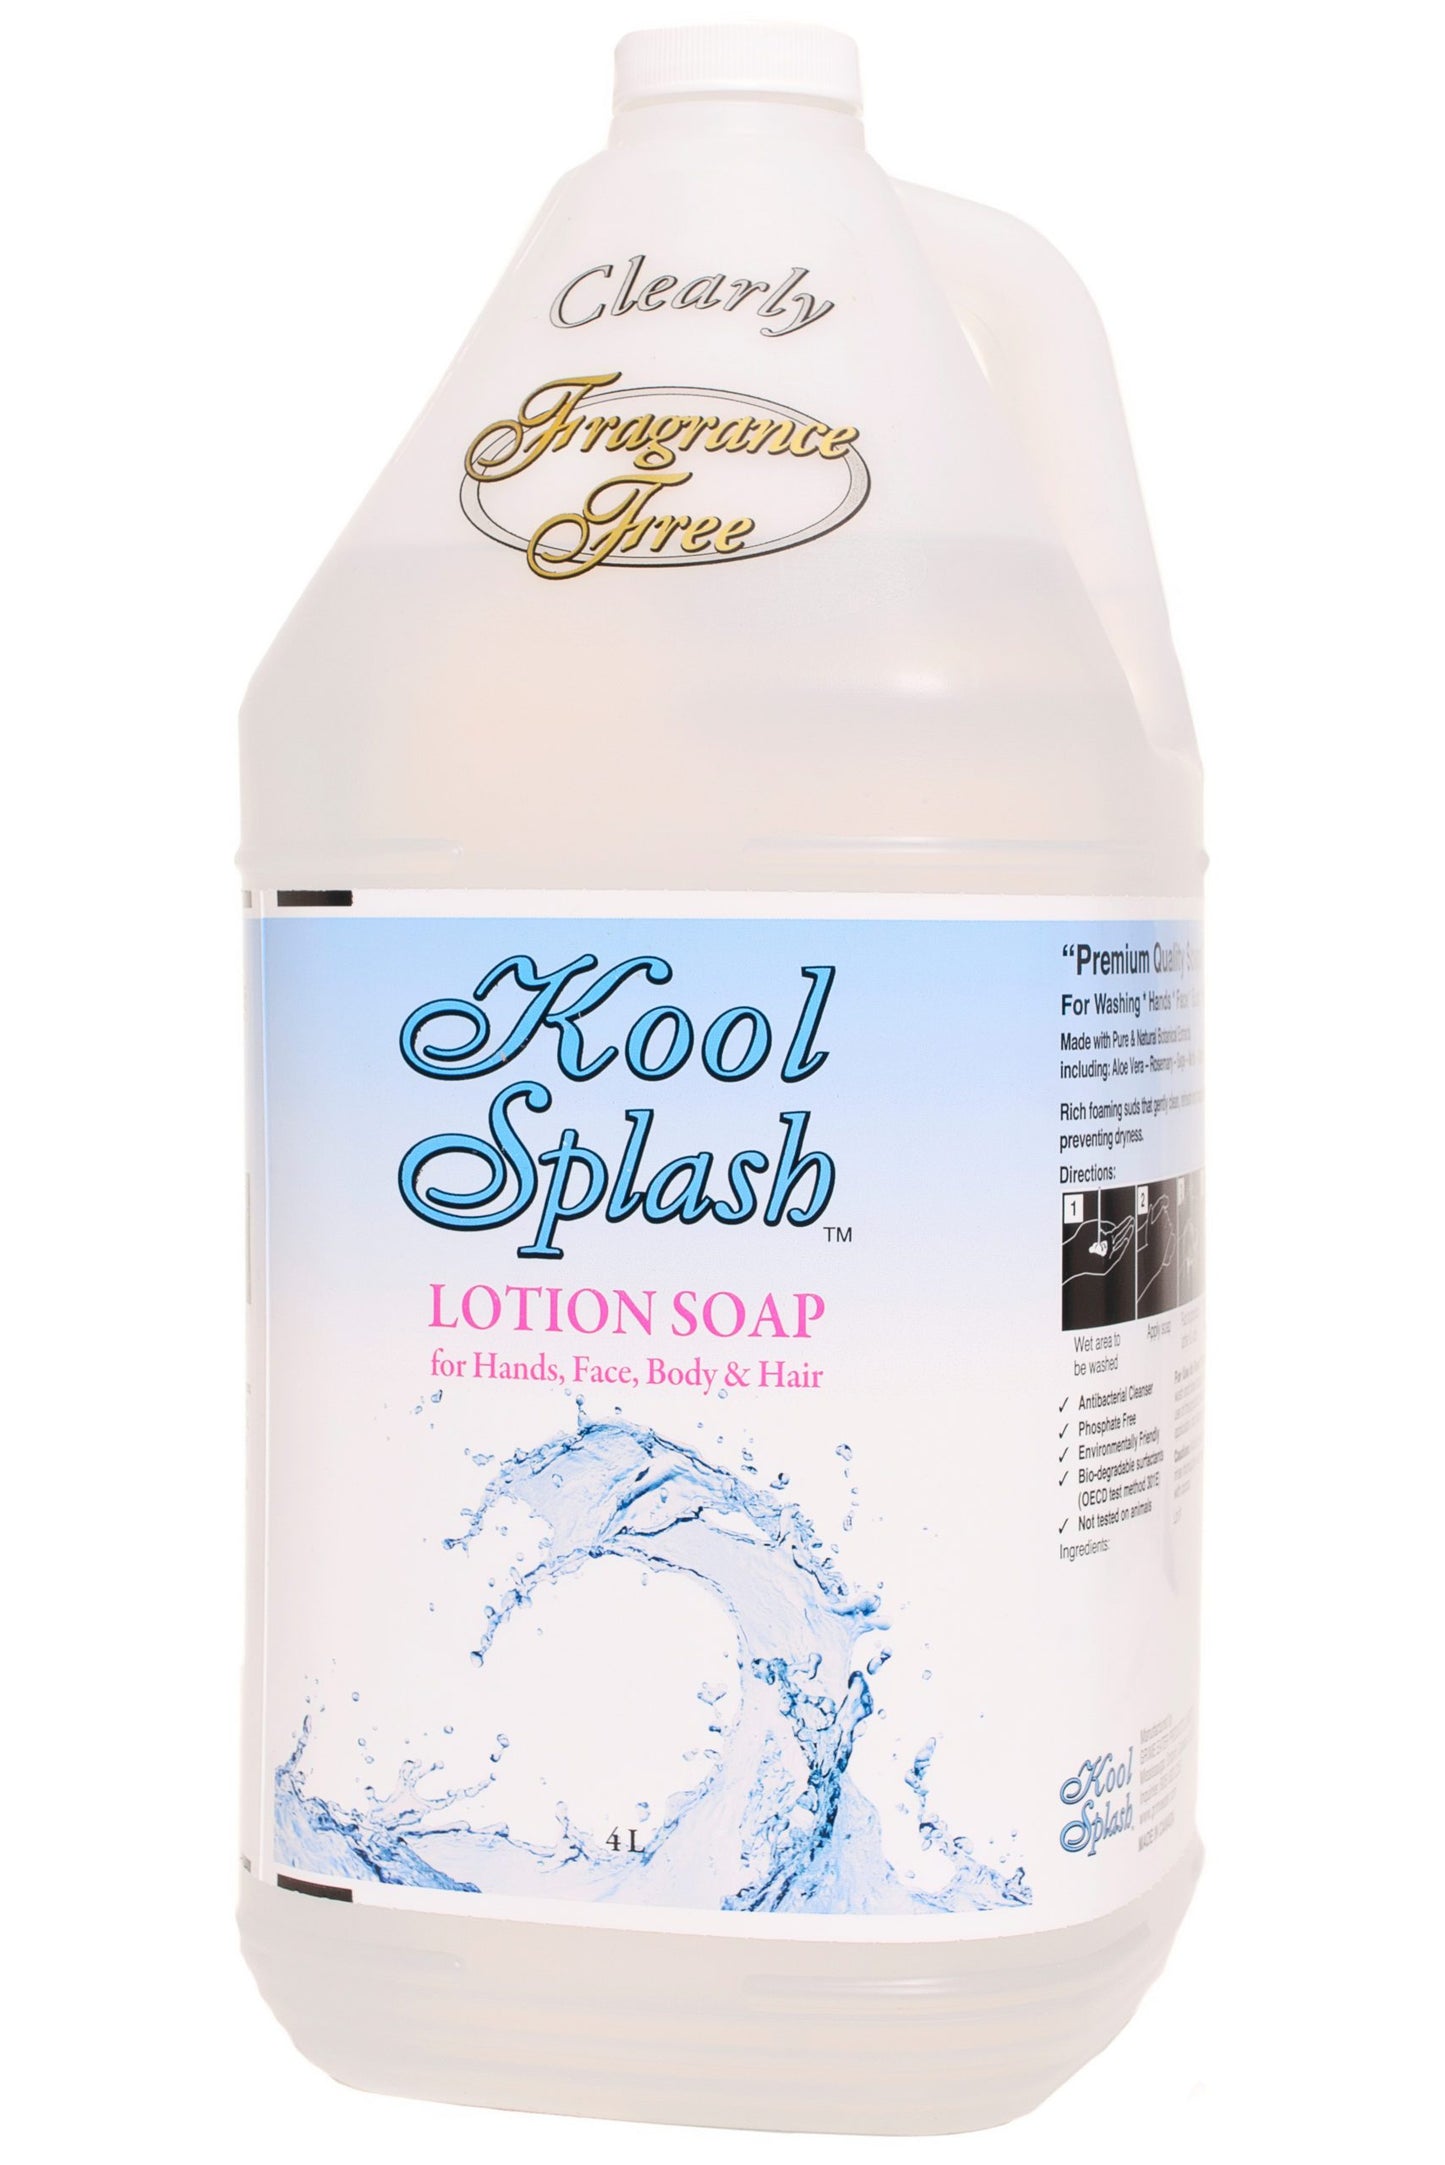 CLEARLY FRAGRANCE FREE LOTION SOAP (4L)